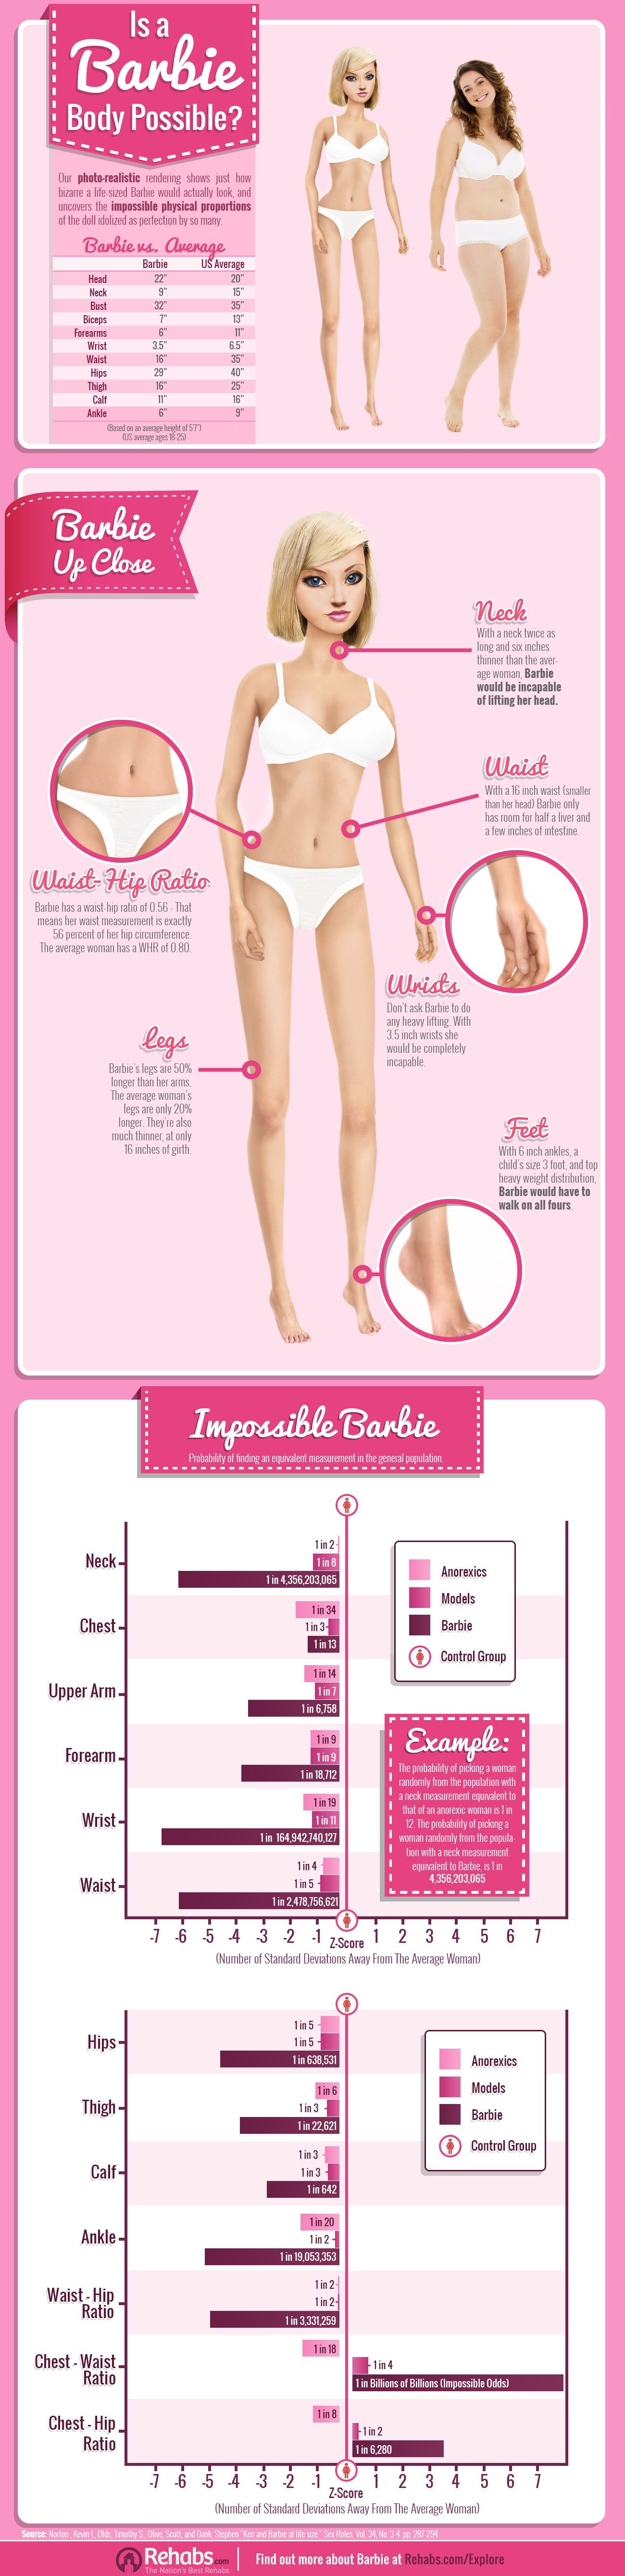 Impossible Barbie.